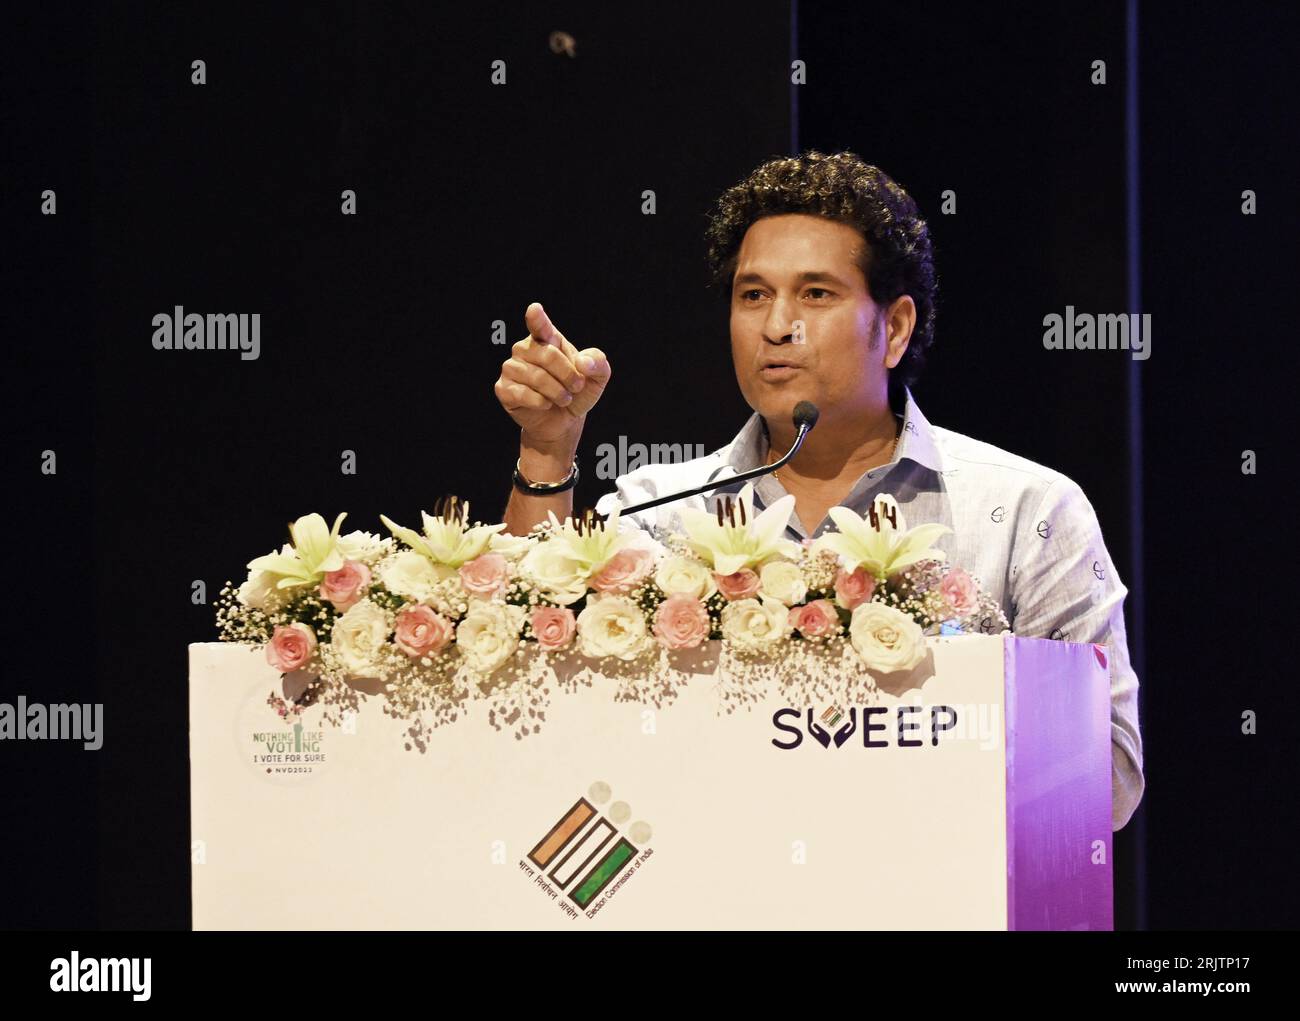 New Delhi, India. 23rd Aug, 2023. NEW DELHI, INDIA - AUGUST 23: Former cricketer Sachin Tendulkar during an event where he was recognised as the 'National Icon' of the Election Commission to encourage greater voter participation in the electoral process at Akashwani Bhawan, on August 23, 2023 in New Delhi, India. (Photo by Sanjeev Verma/Hindustan Times/Sipa USA) Credit: Sipa USA/Alamy Live News Stock Photo